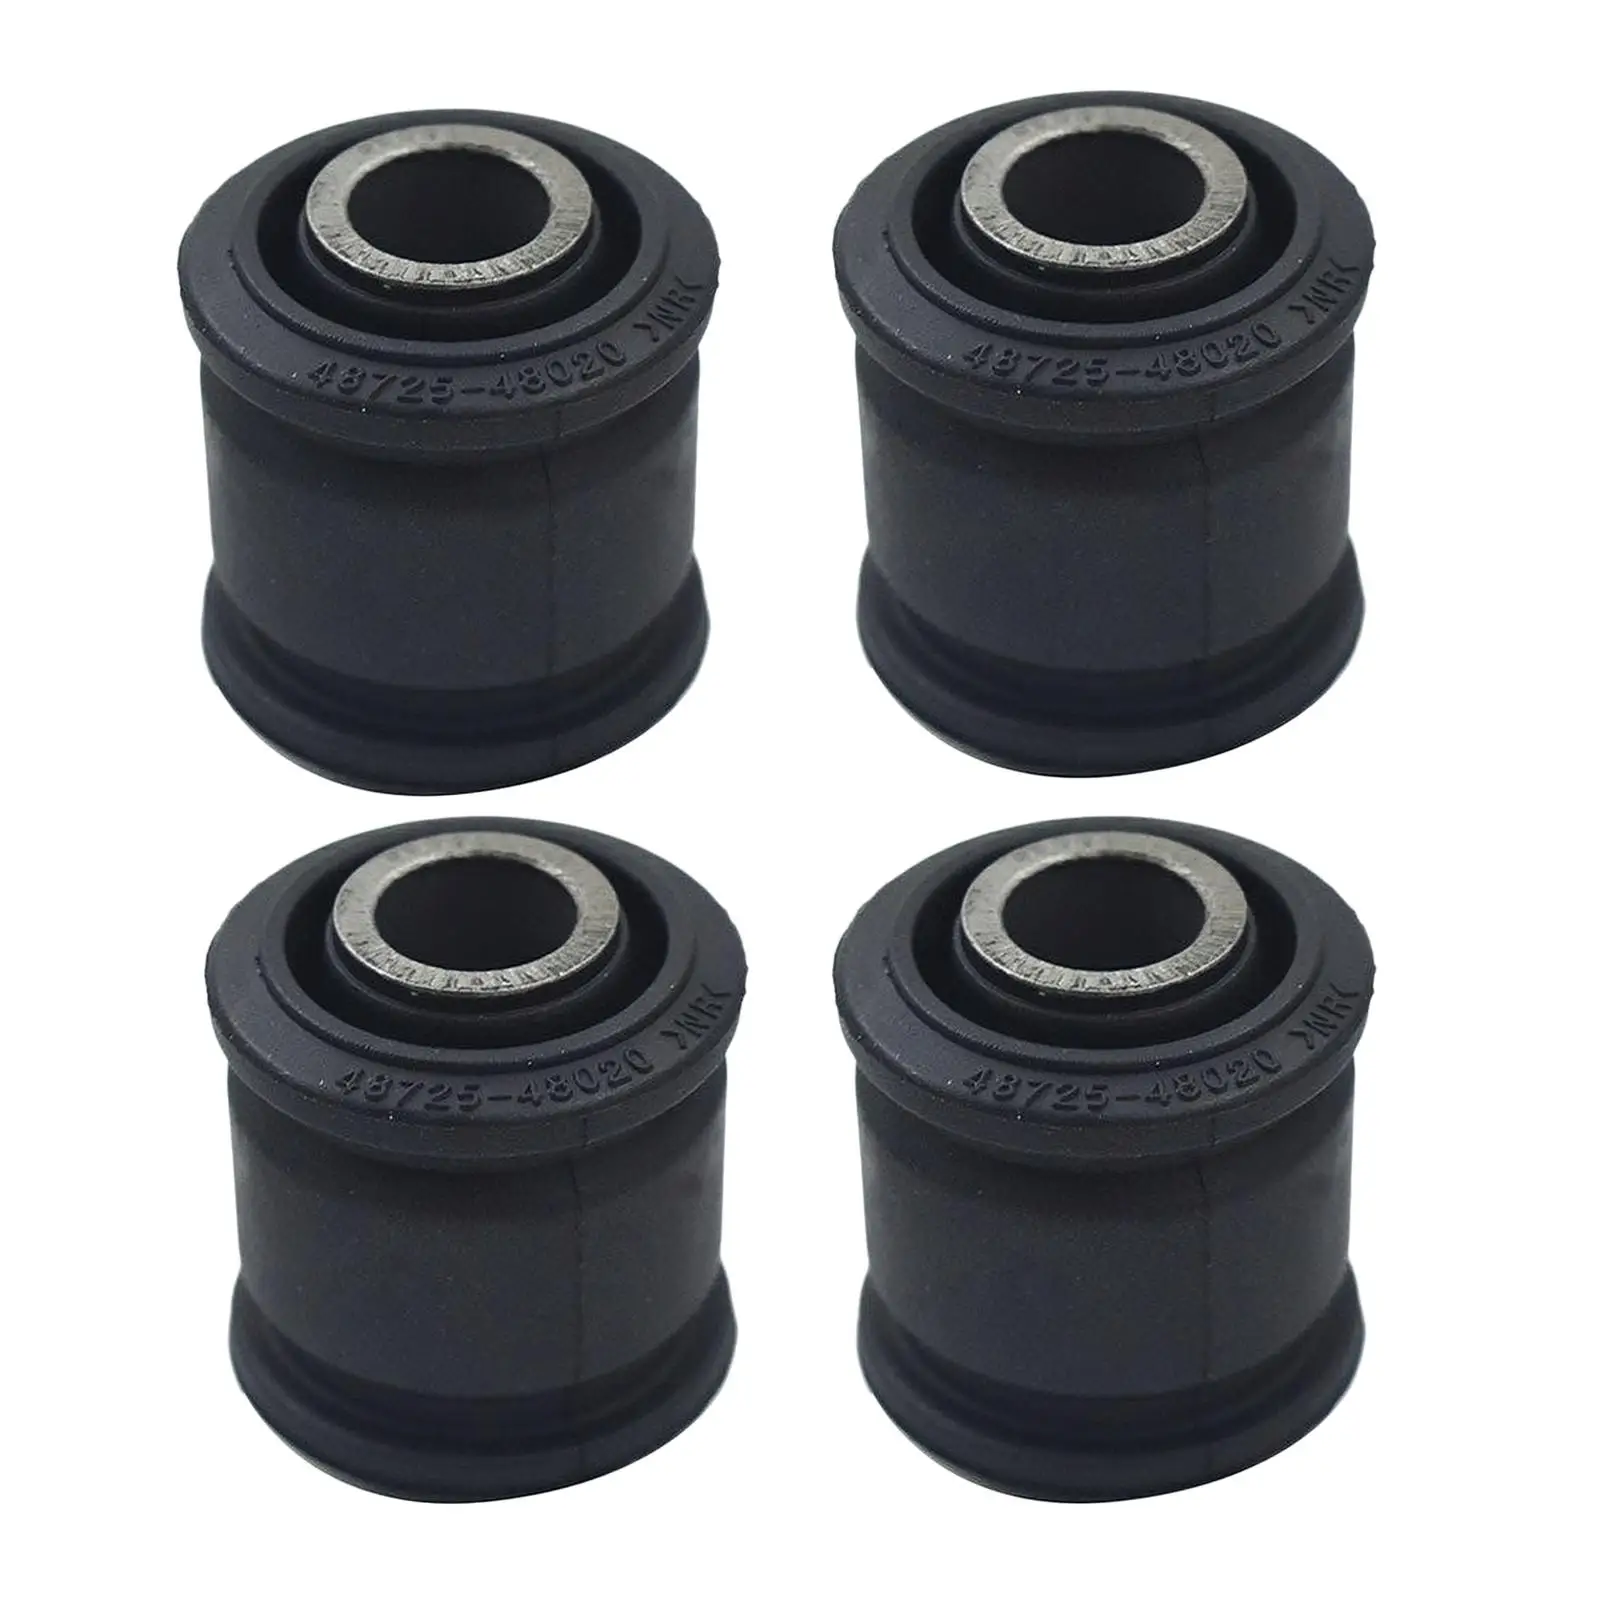 4x Rear Trailing Arm Bushing 48725-48020 Replacement Fit for highlander DIY 